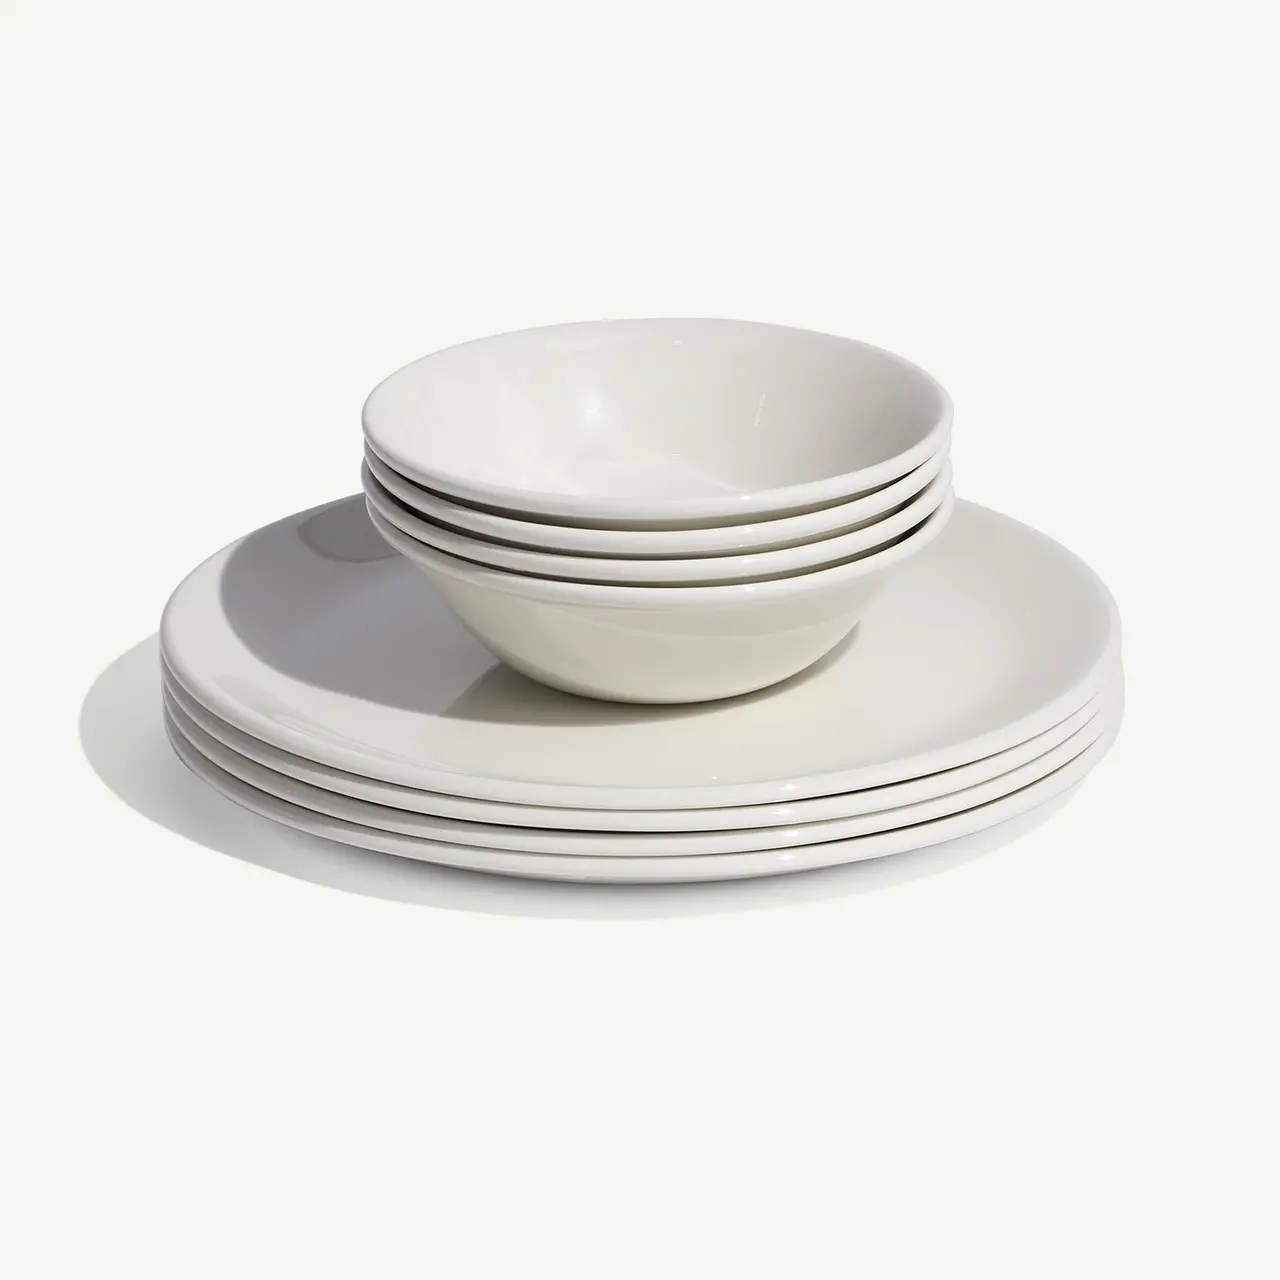 A stack of clean, white plates and bowls are neatly arranged on a light background.